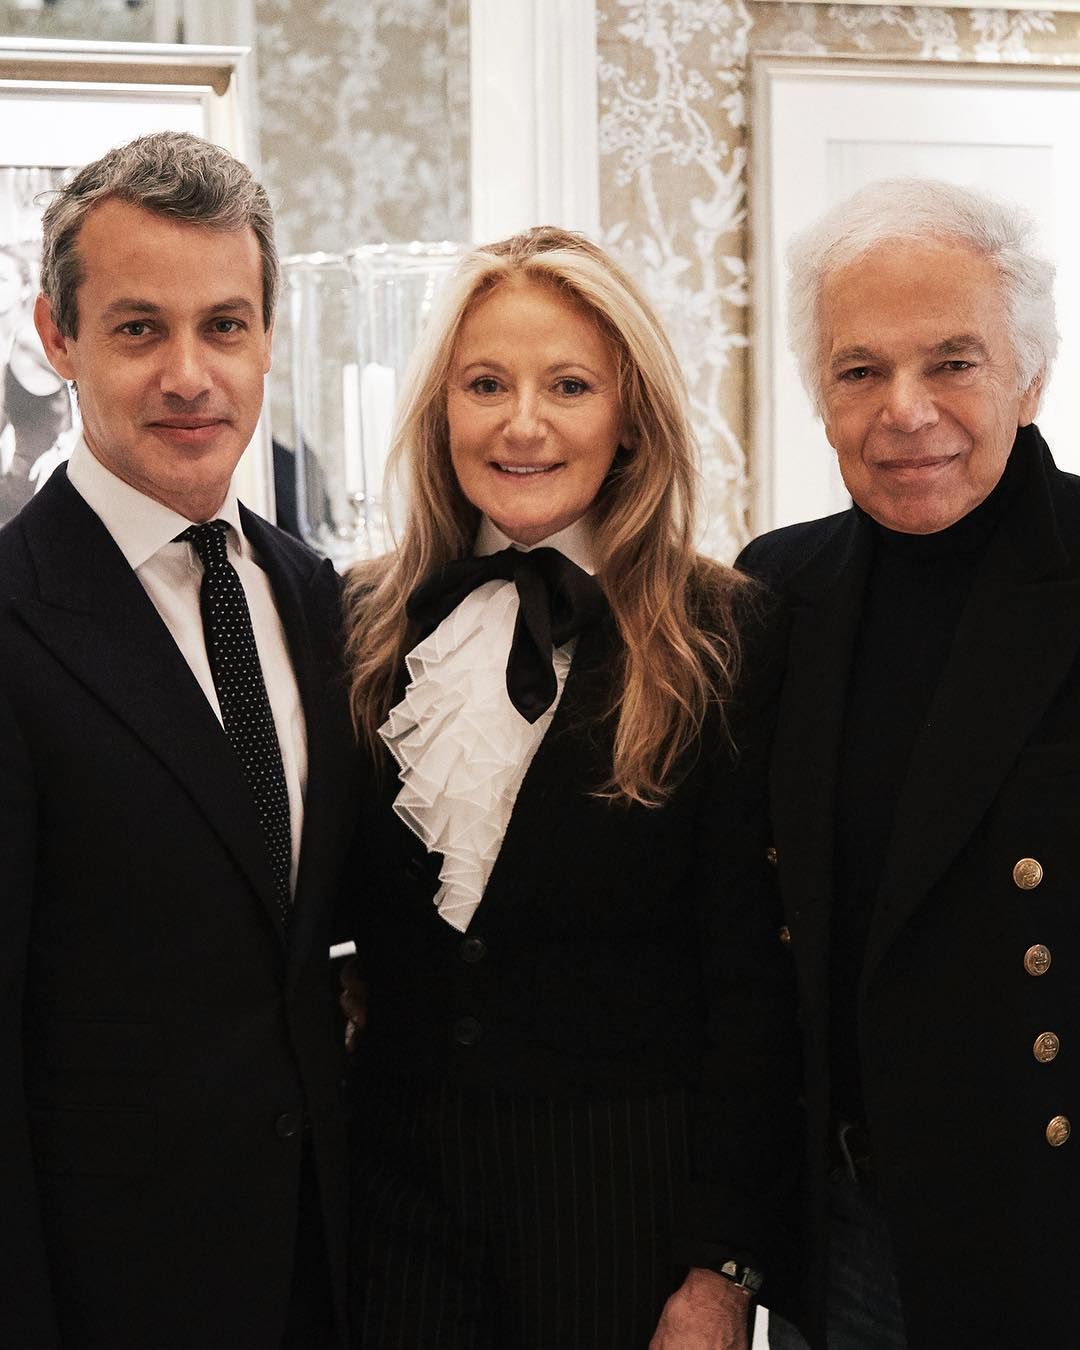 Unfold the profile of 6 heirs to the world's largest fashion empires